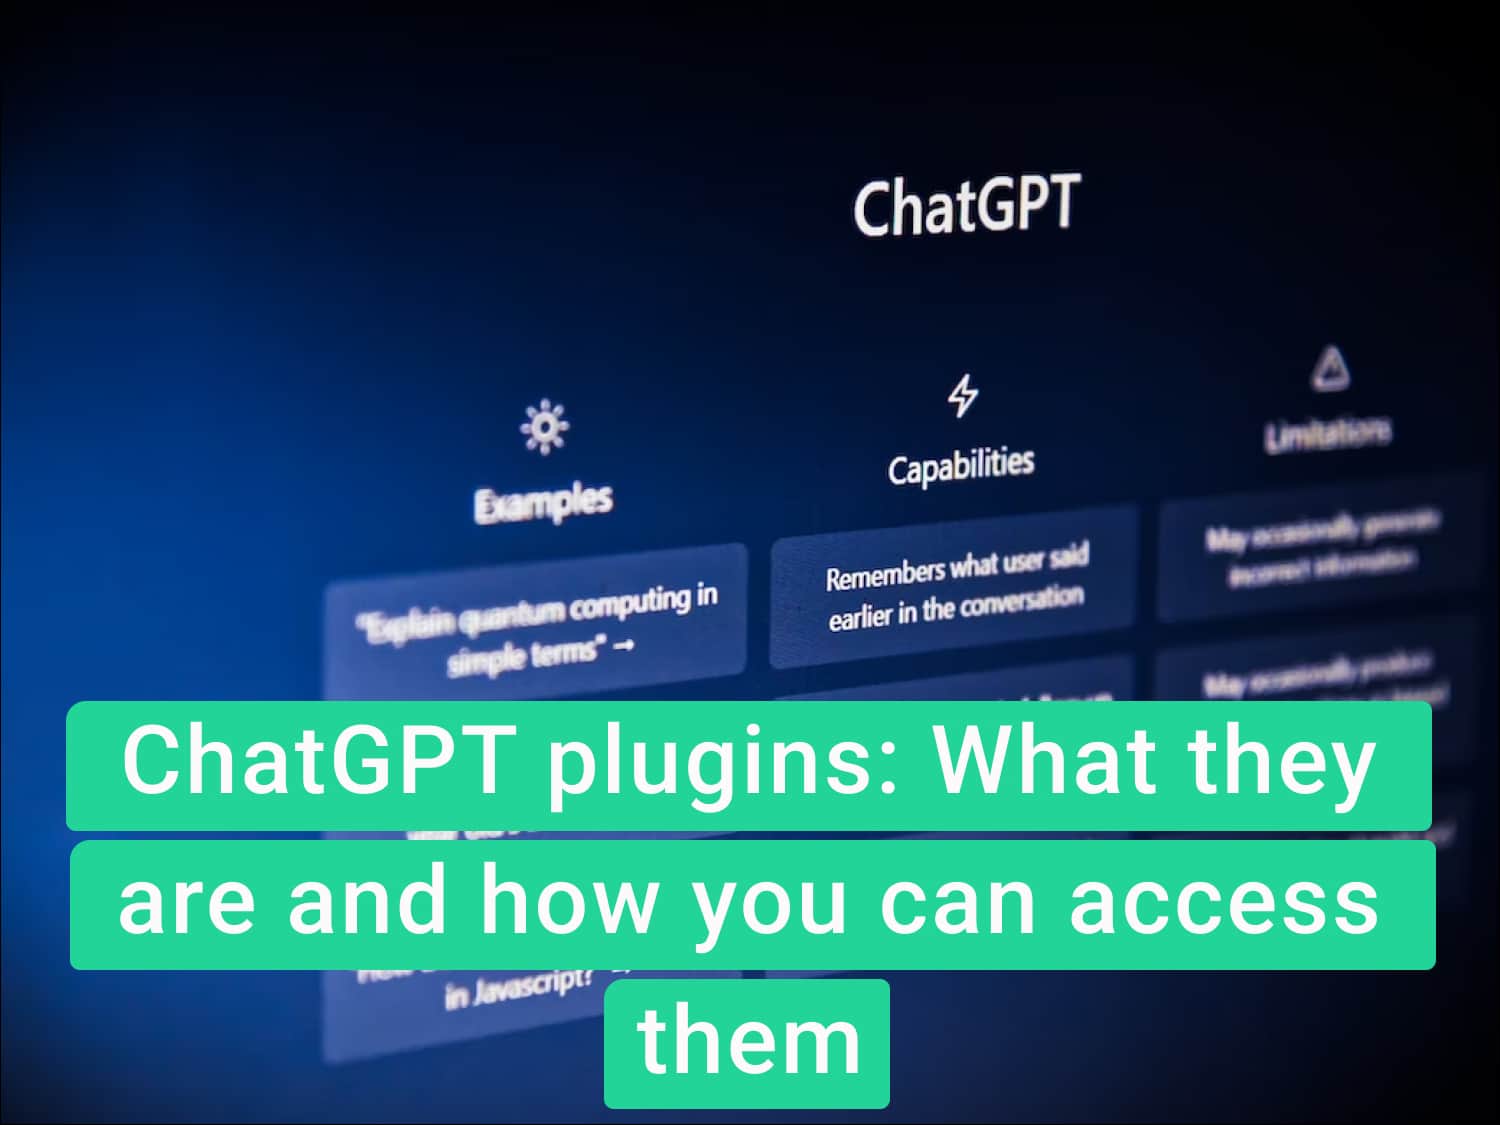 What are ChatGPT plugins and how do you access them?